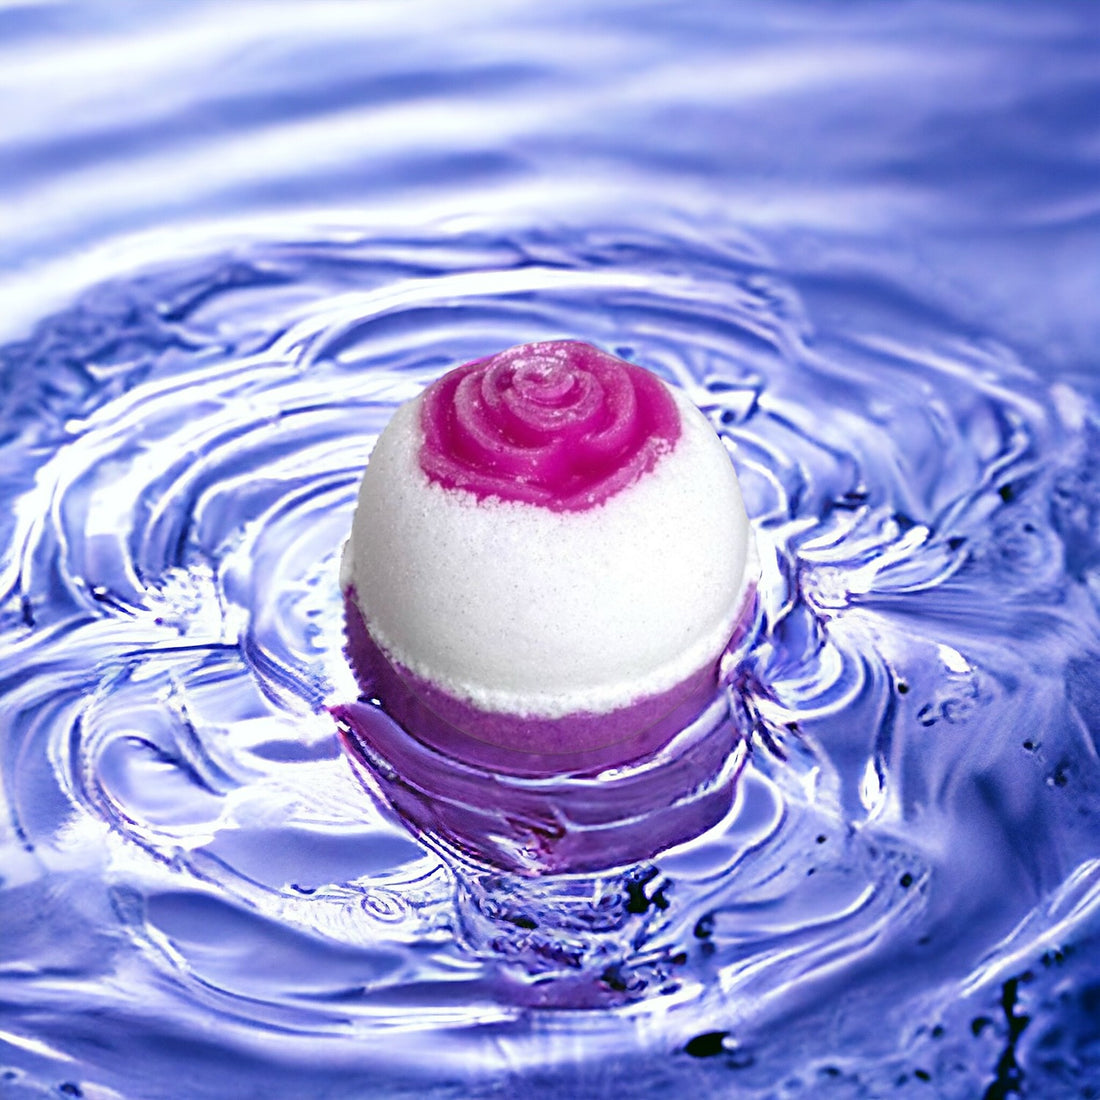 Bulk Bath Bombs: The Smart Way to Save Money and Elevate Your Bath Experience